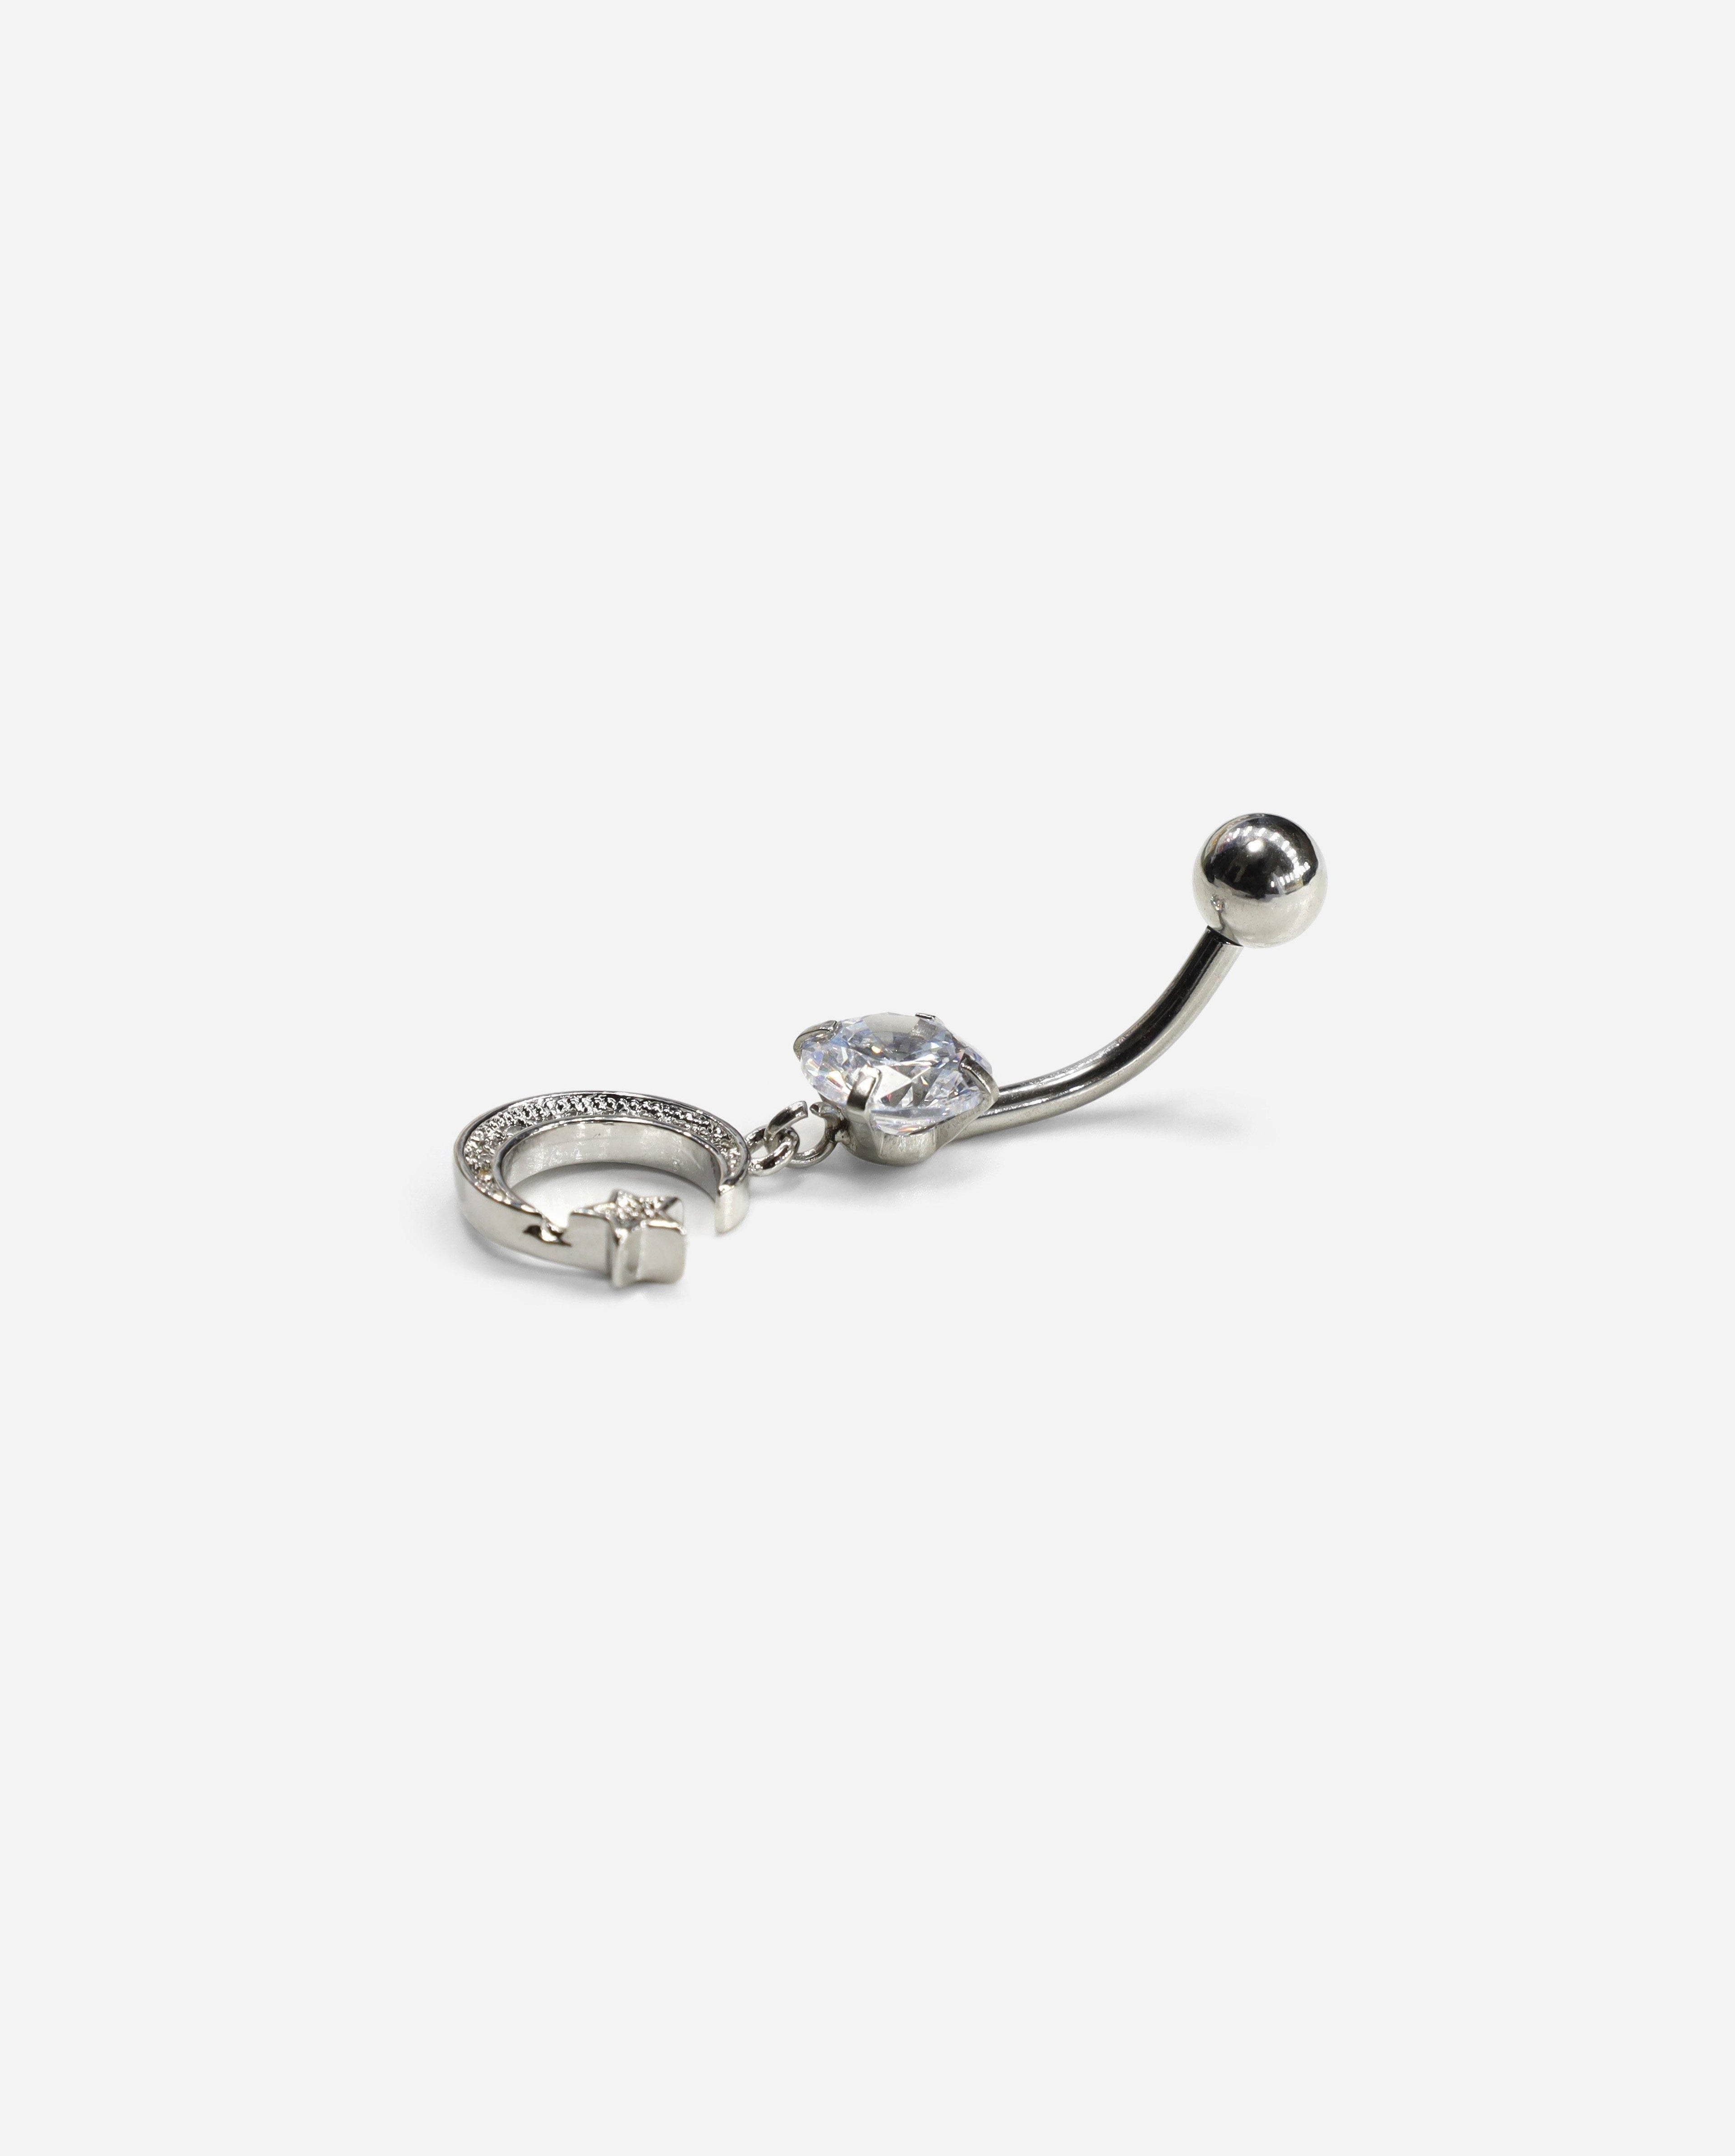 Gracias Dios Crescent Moon Star Dangle Belly Ring - Challenger Streetwear